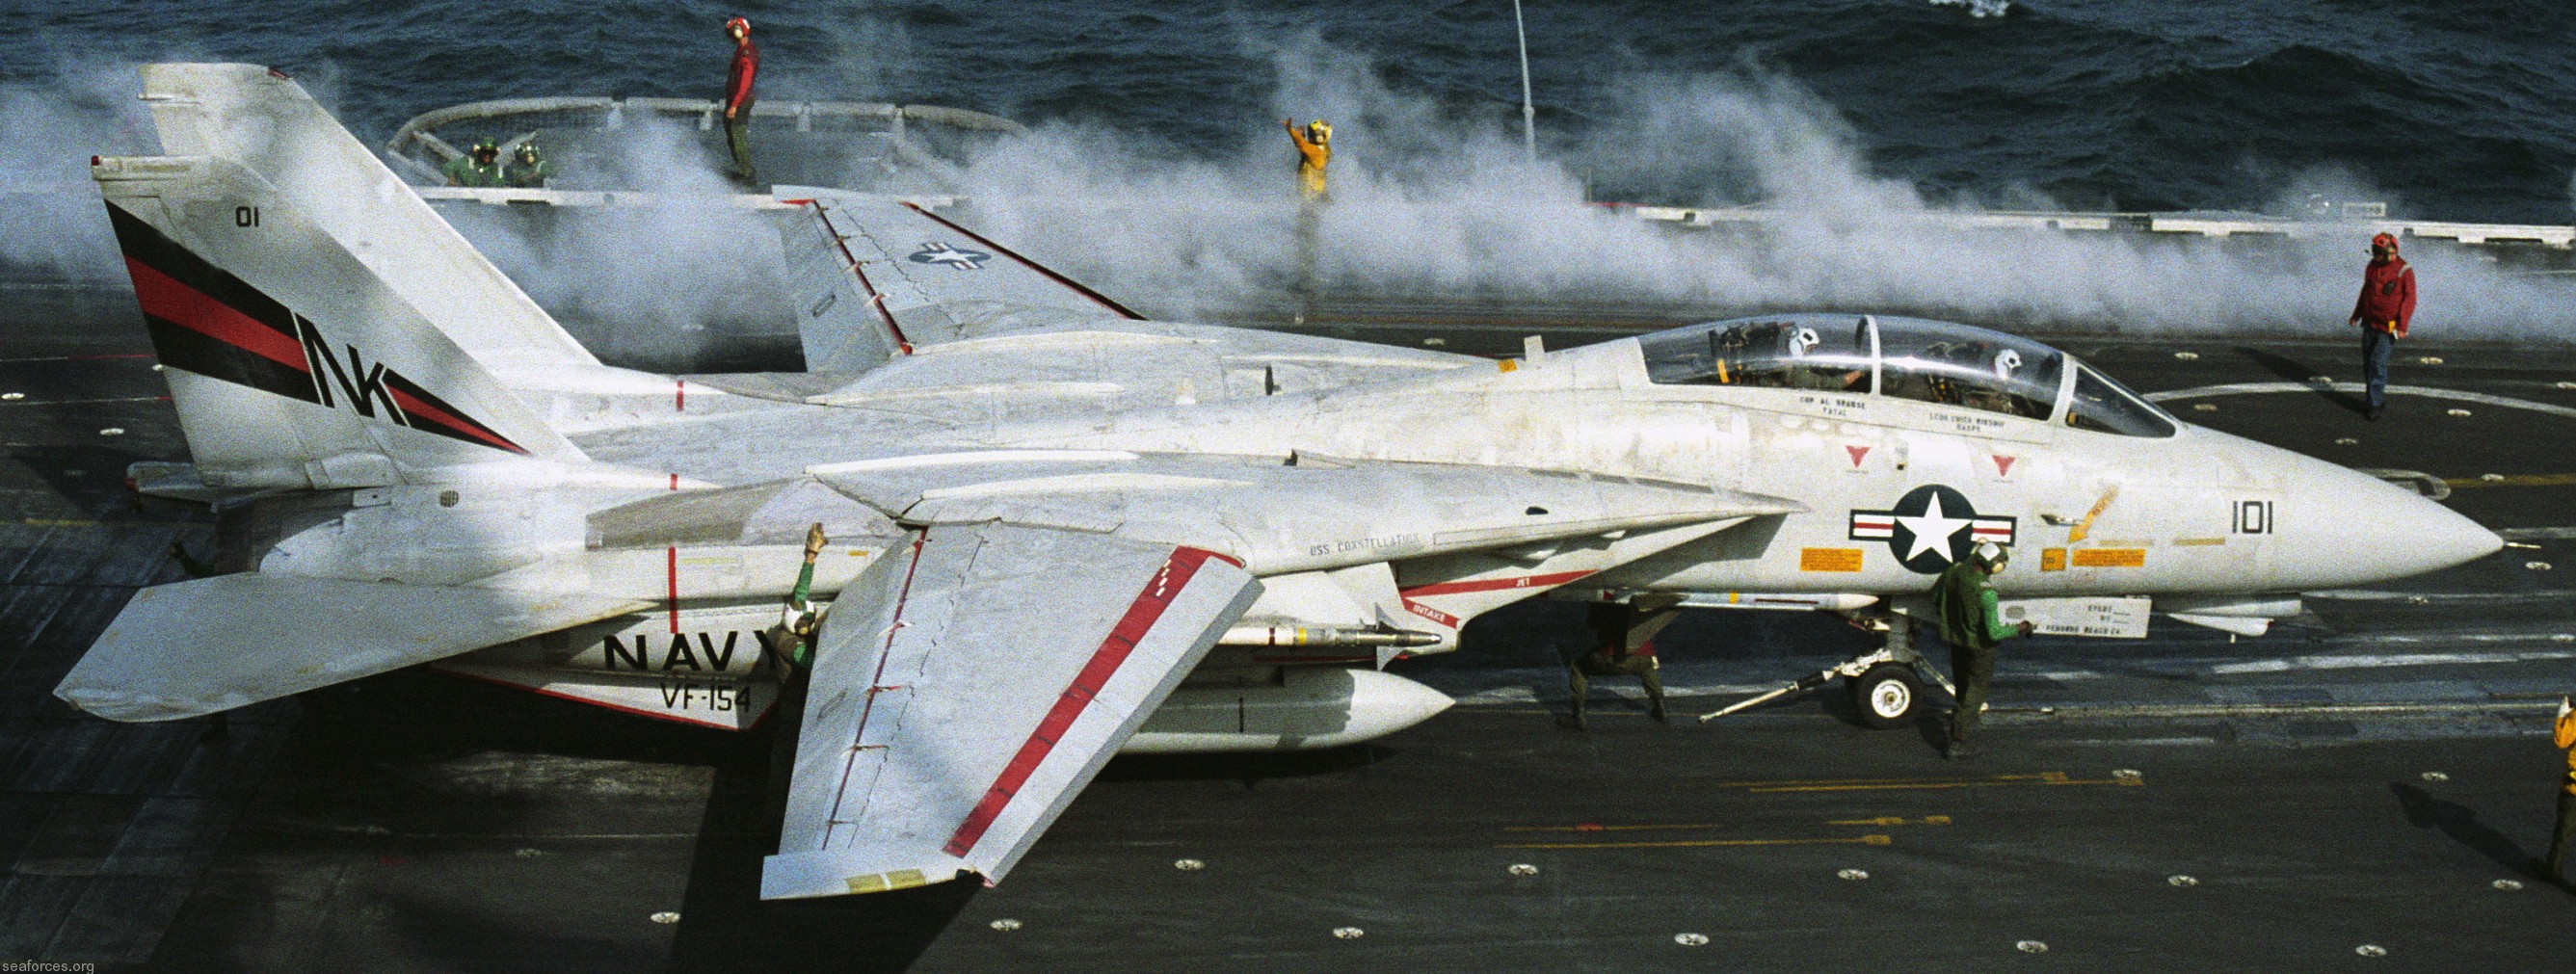 vf-154 black knights fighter squadron us navy f-14a tomcat carrier air wing cvw-14 05 uss constellation cv-64